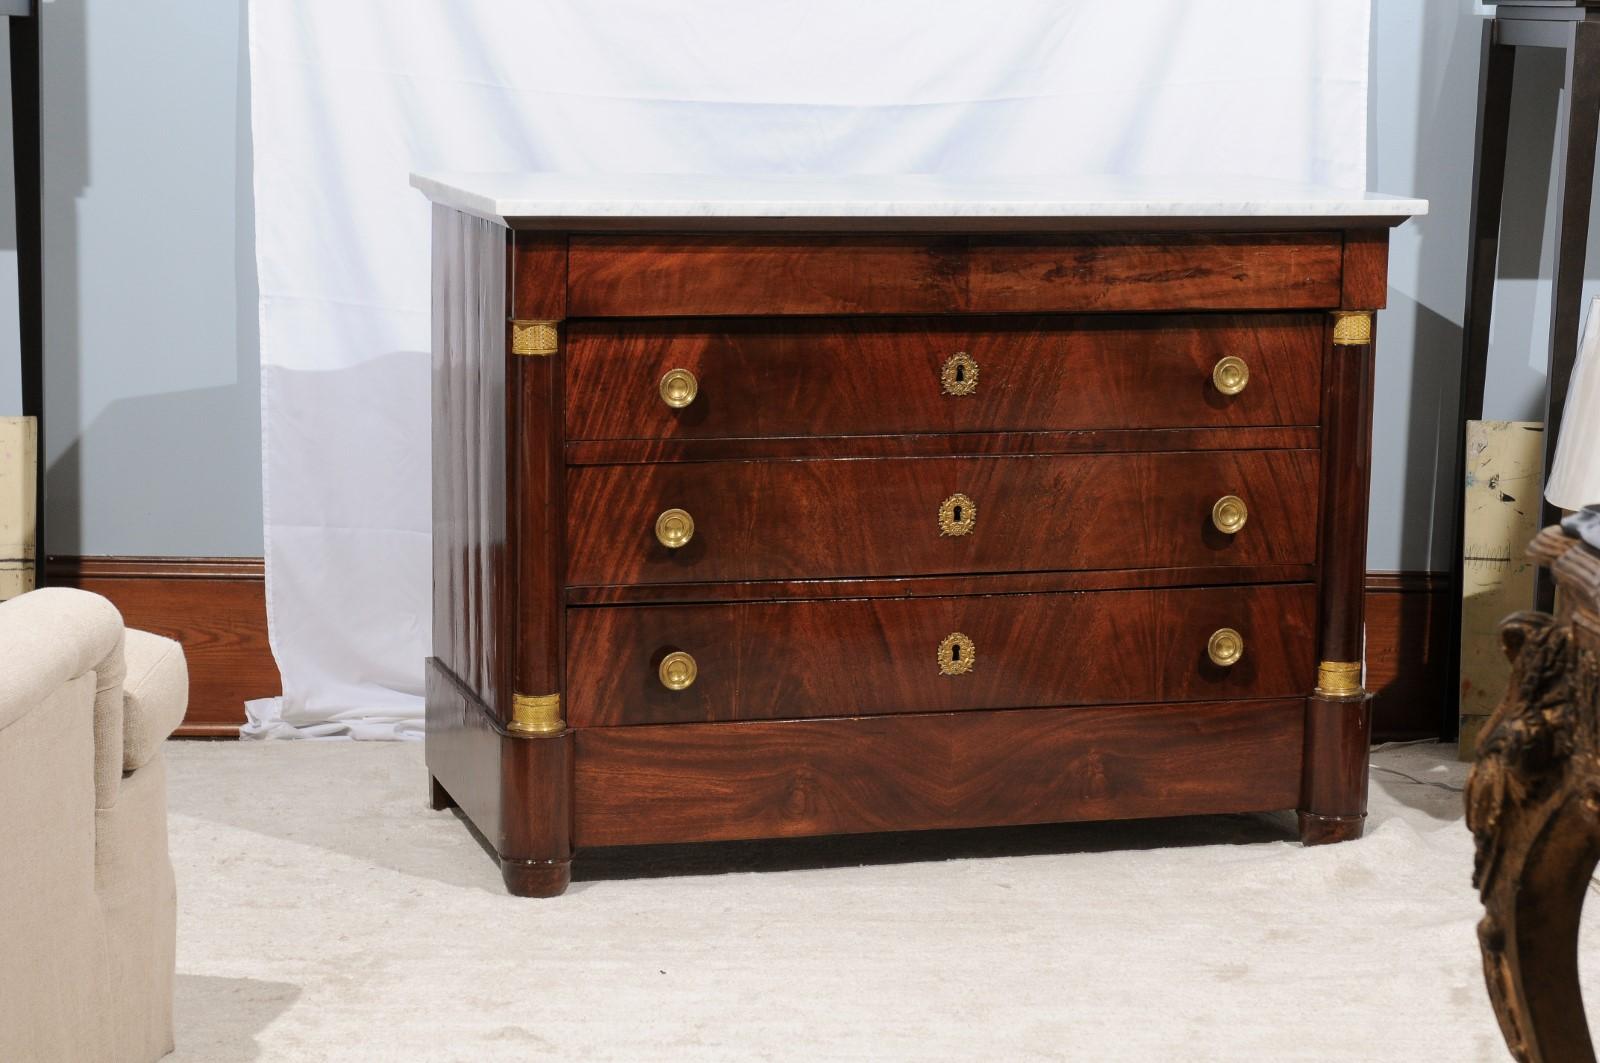 Early 20th century mahogany Empire style chest of drawers or dresser, having an overhanging white marble top and cornice, supported by flanking applied columns on a rounded bases, with an undecorated apron, bun feet, and gilt metal escutcheons,